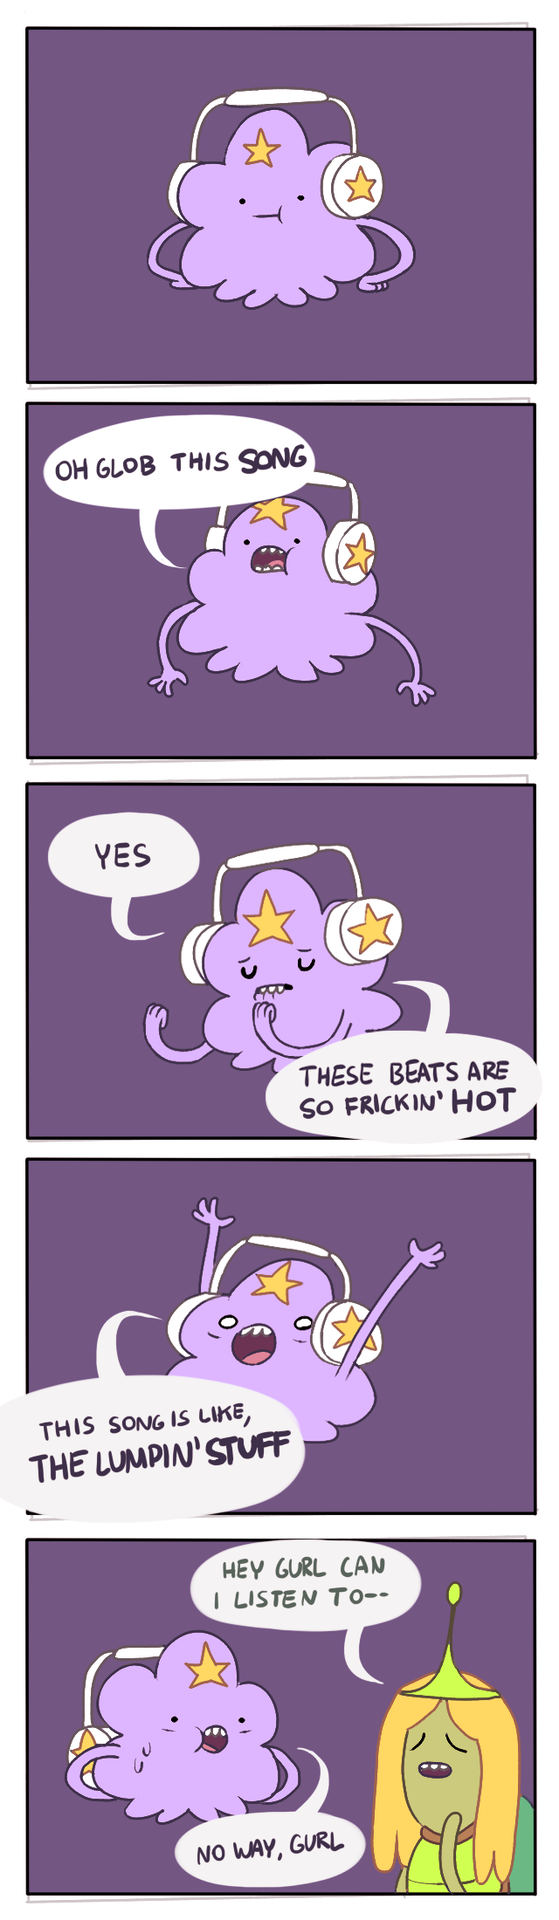 LSP i can hear her in my head hahaaha